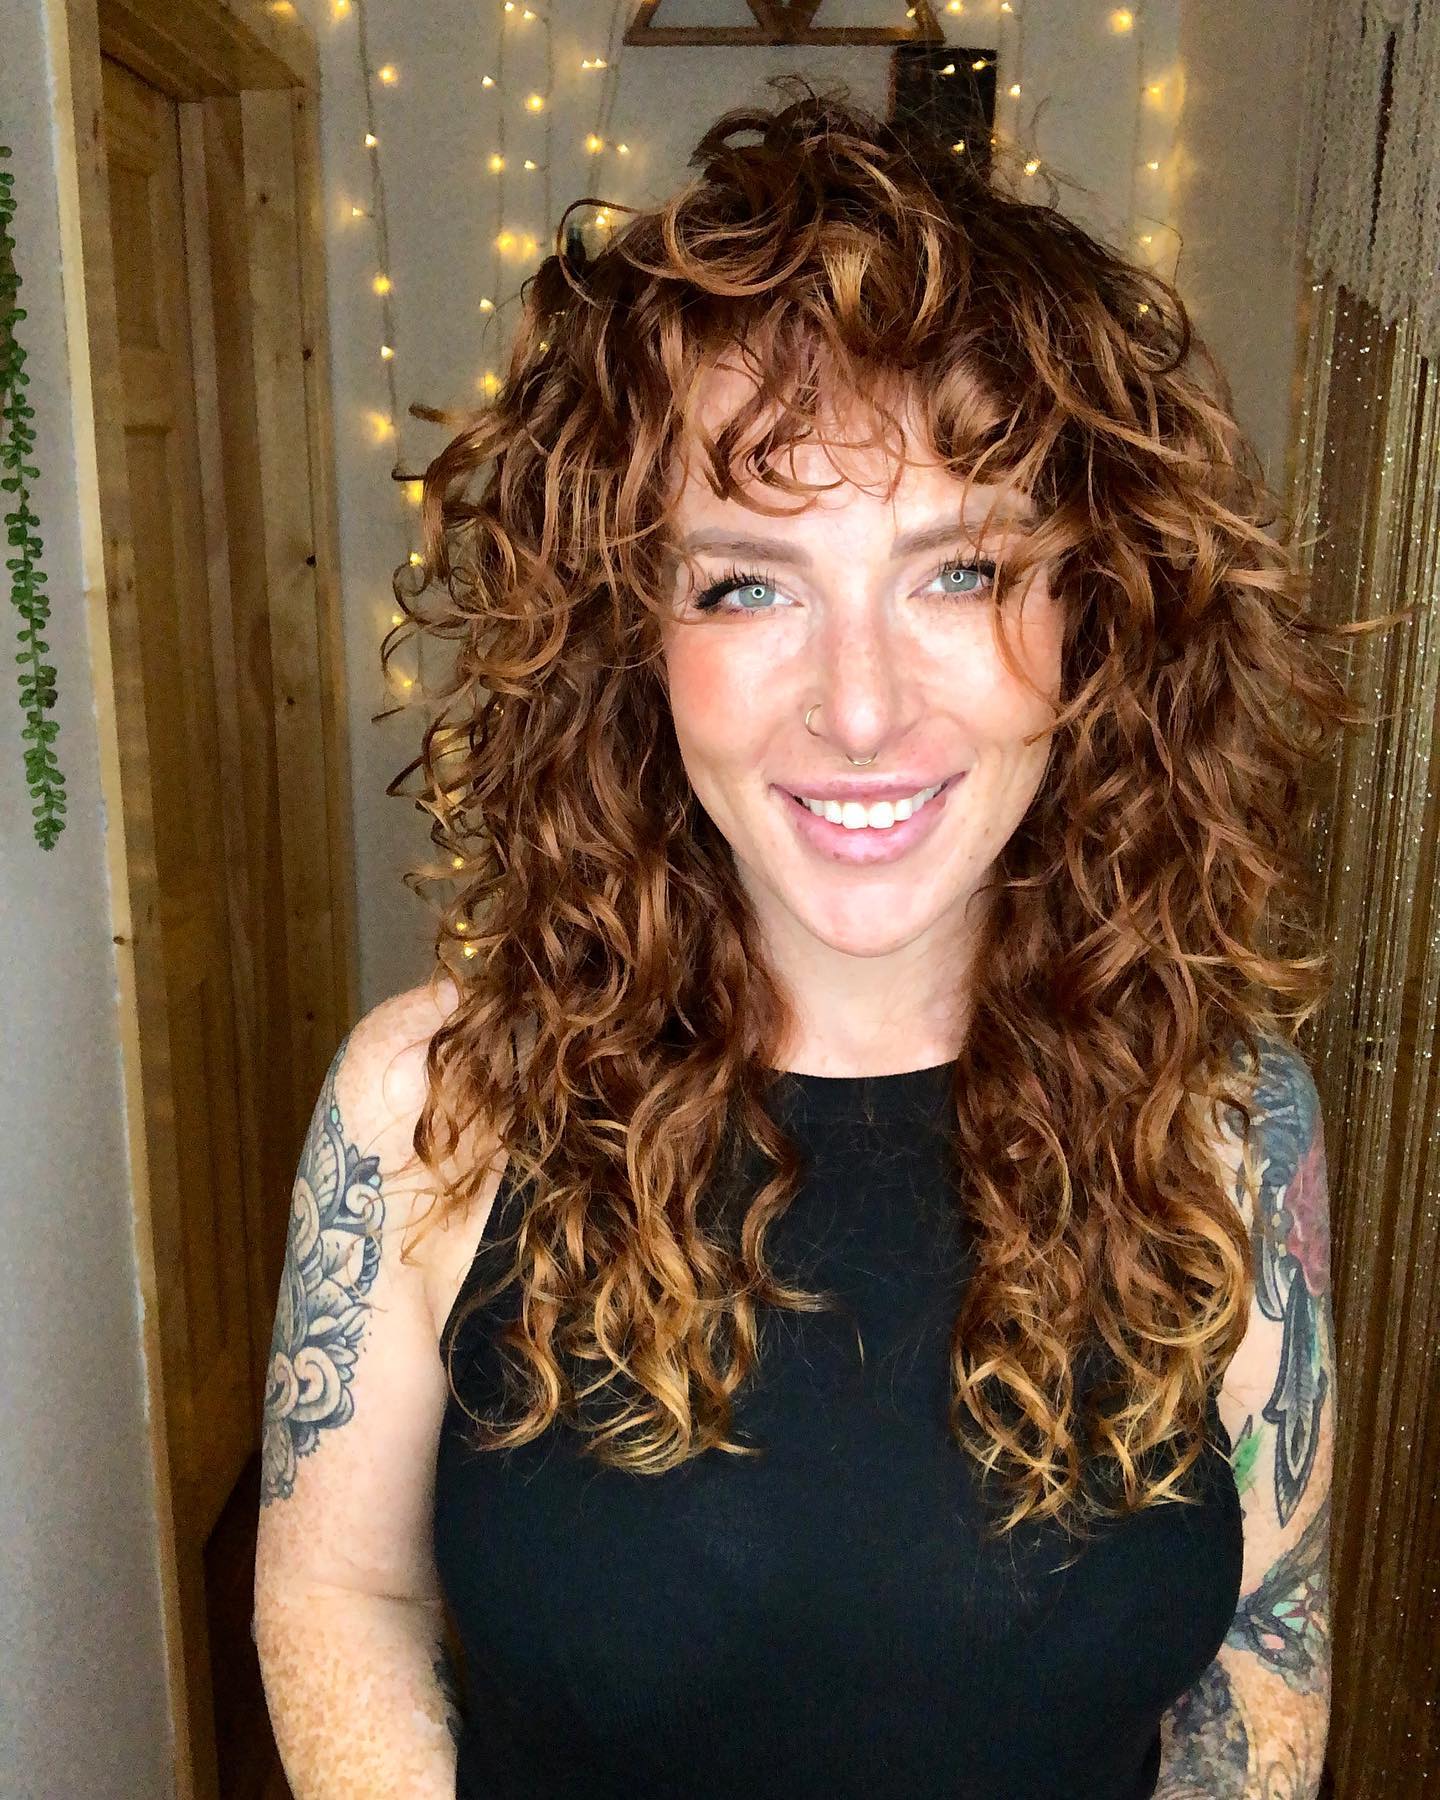 Curly Shag Hairstyle 25 Curly hair shaggy bob | Curly shag mullet | Medium length curly shags Curly Shag Hairstyles for Women